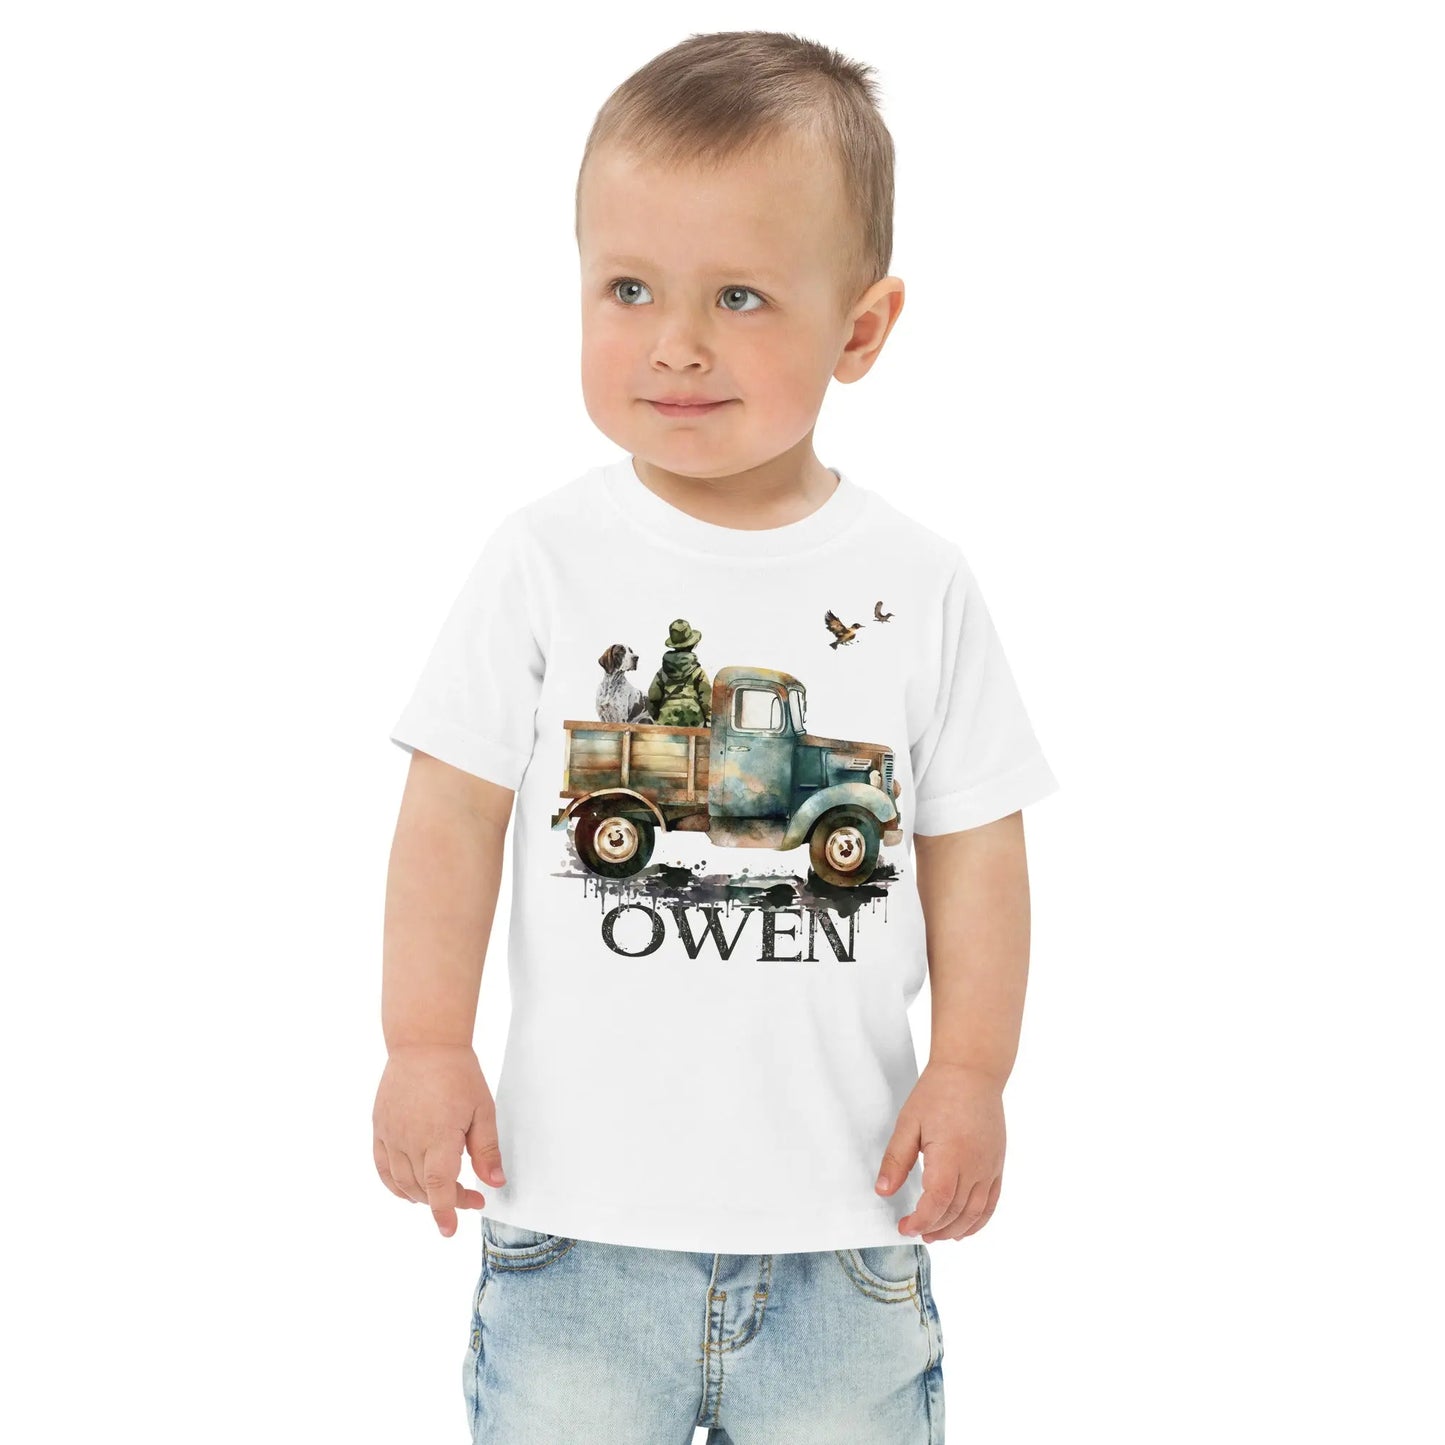 Personalized Hunting Camo Shirt For Boy Amazing Faith Designs